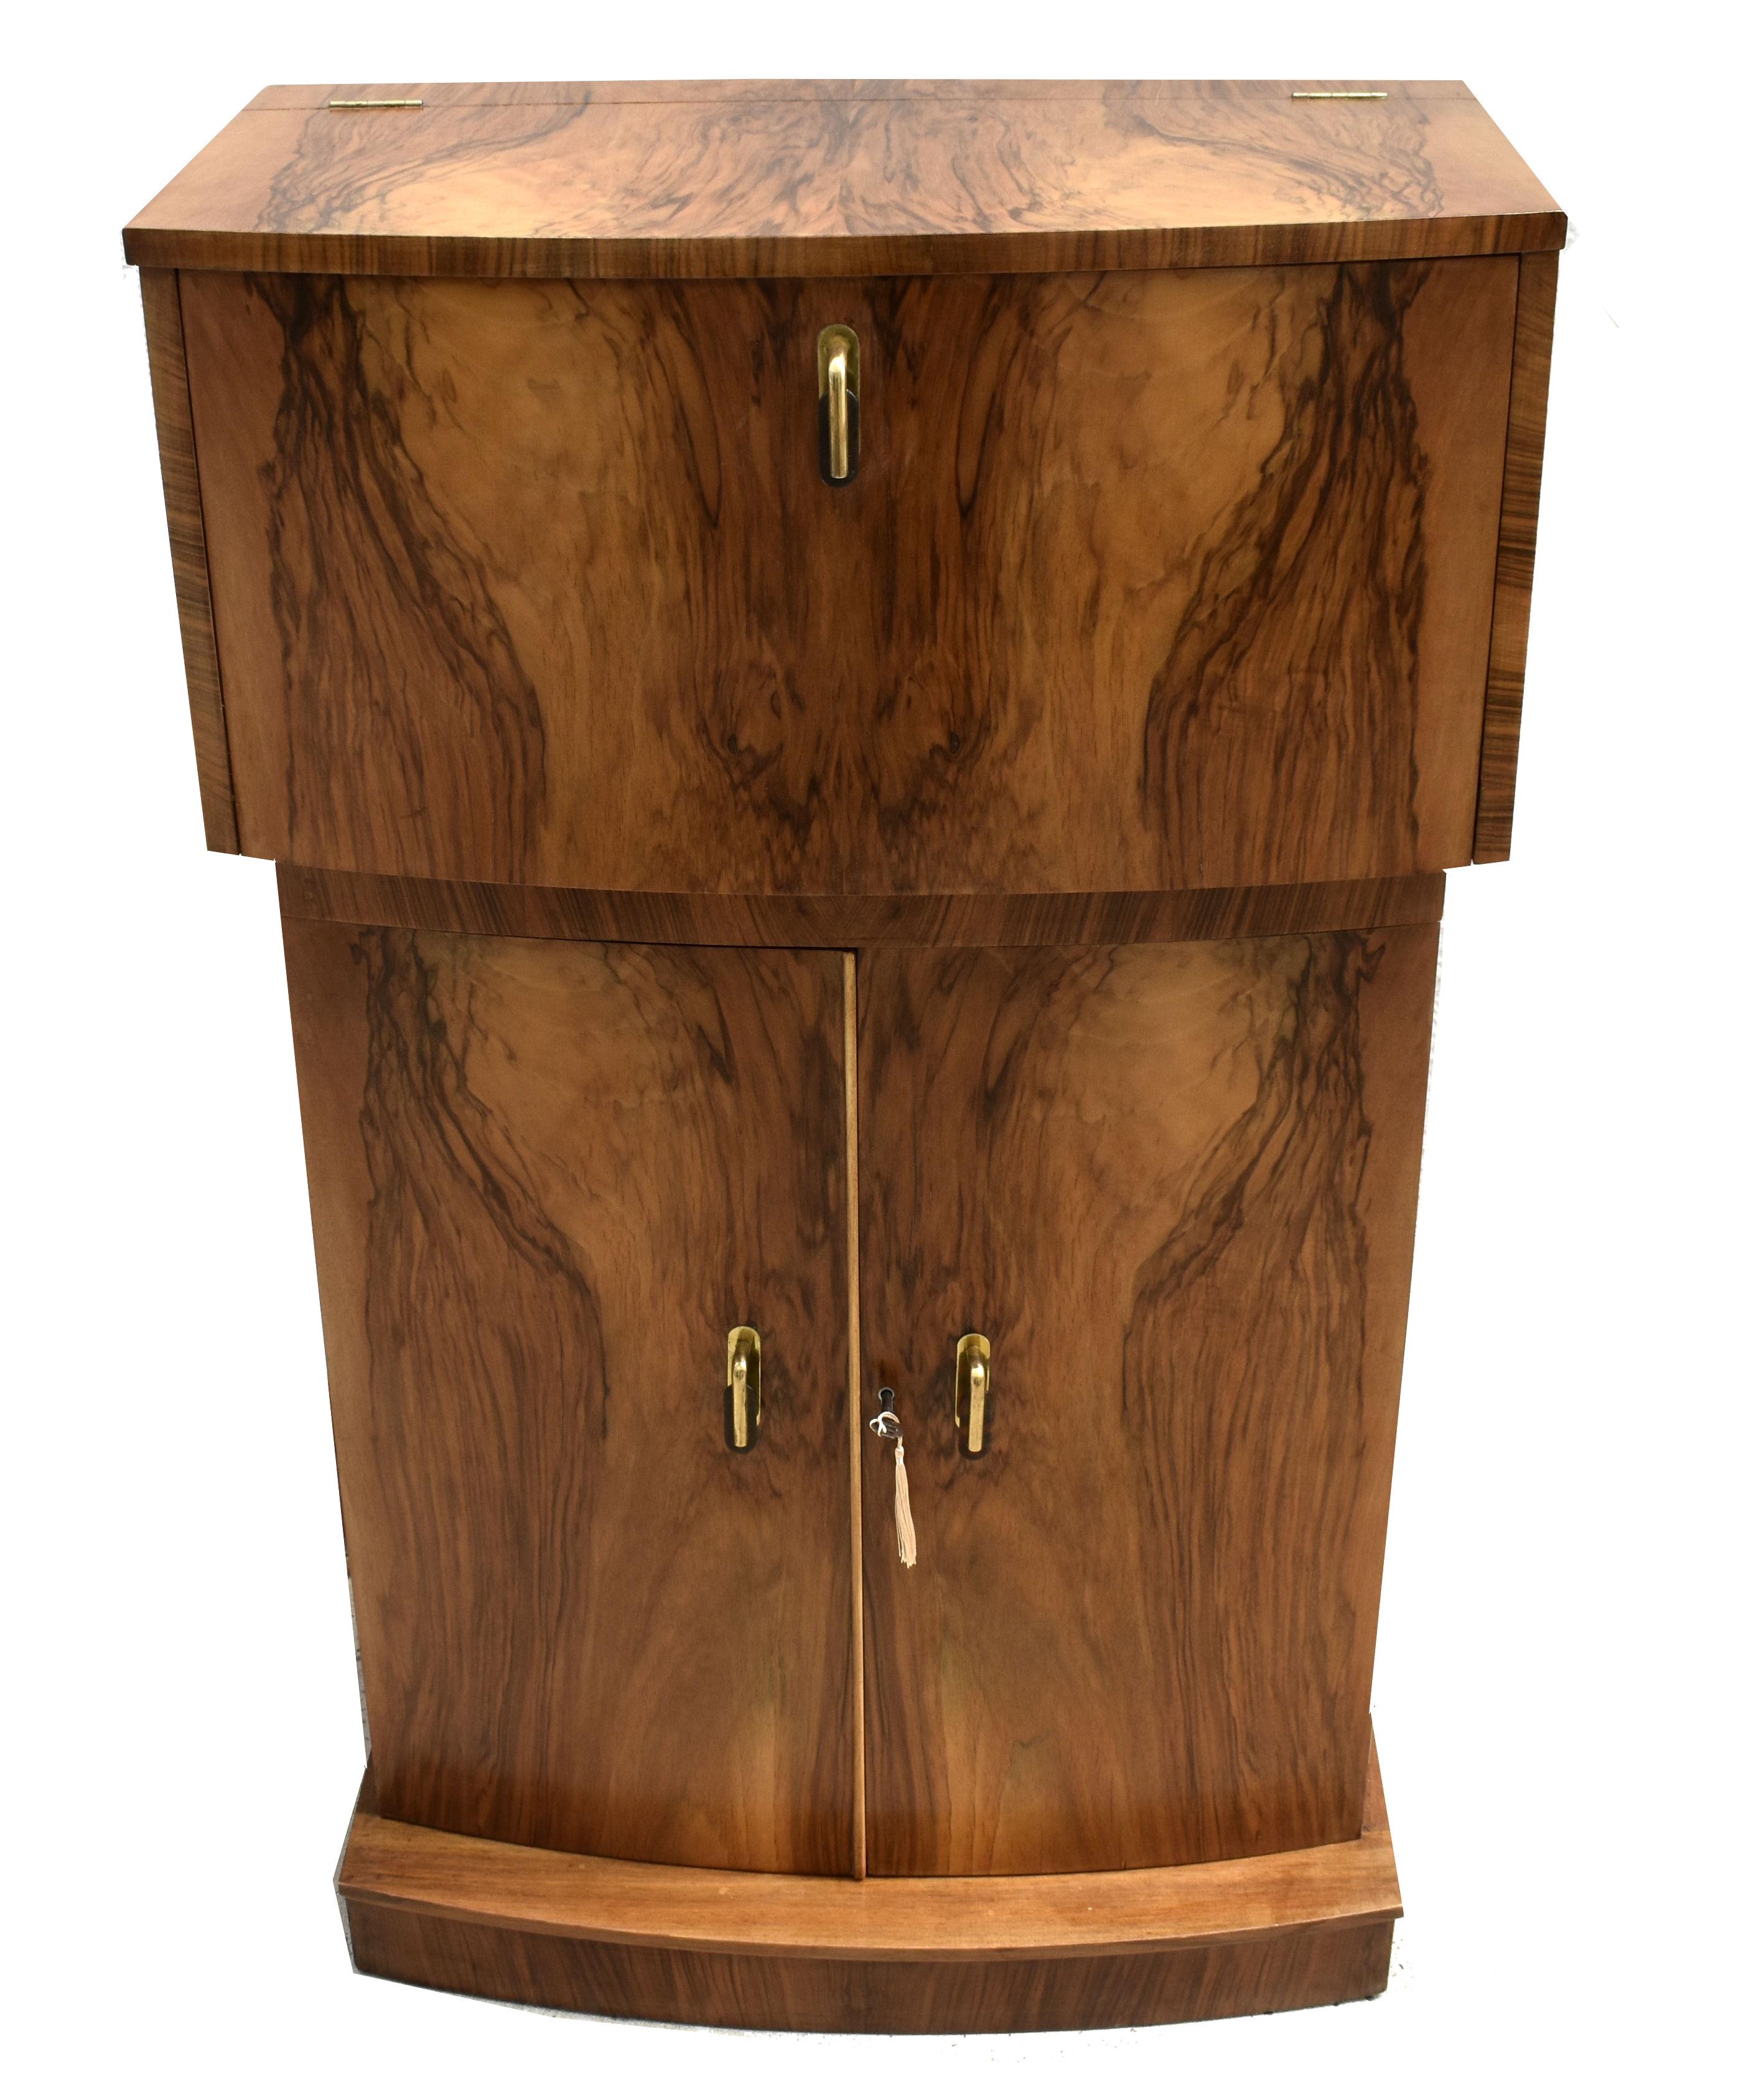 For your consideration is this fabulously stylish 1930's Art Deco cocktail cabinet. Wonderful and an unusual shape being of a stepped bow form. This cabinet dates from the 1930's and has all the bells and whistles you want from a cocktail cabinet.